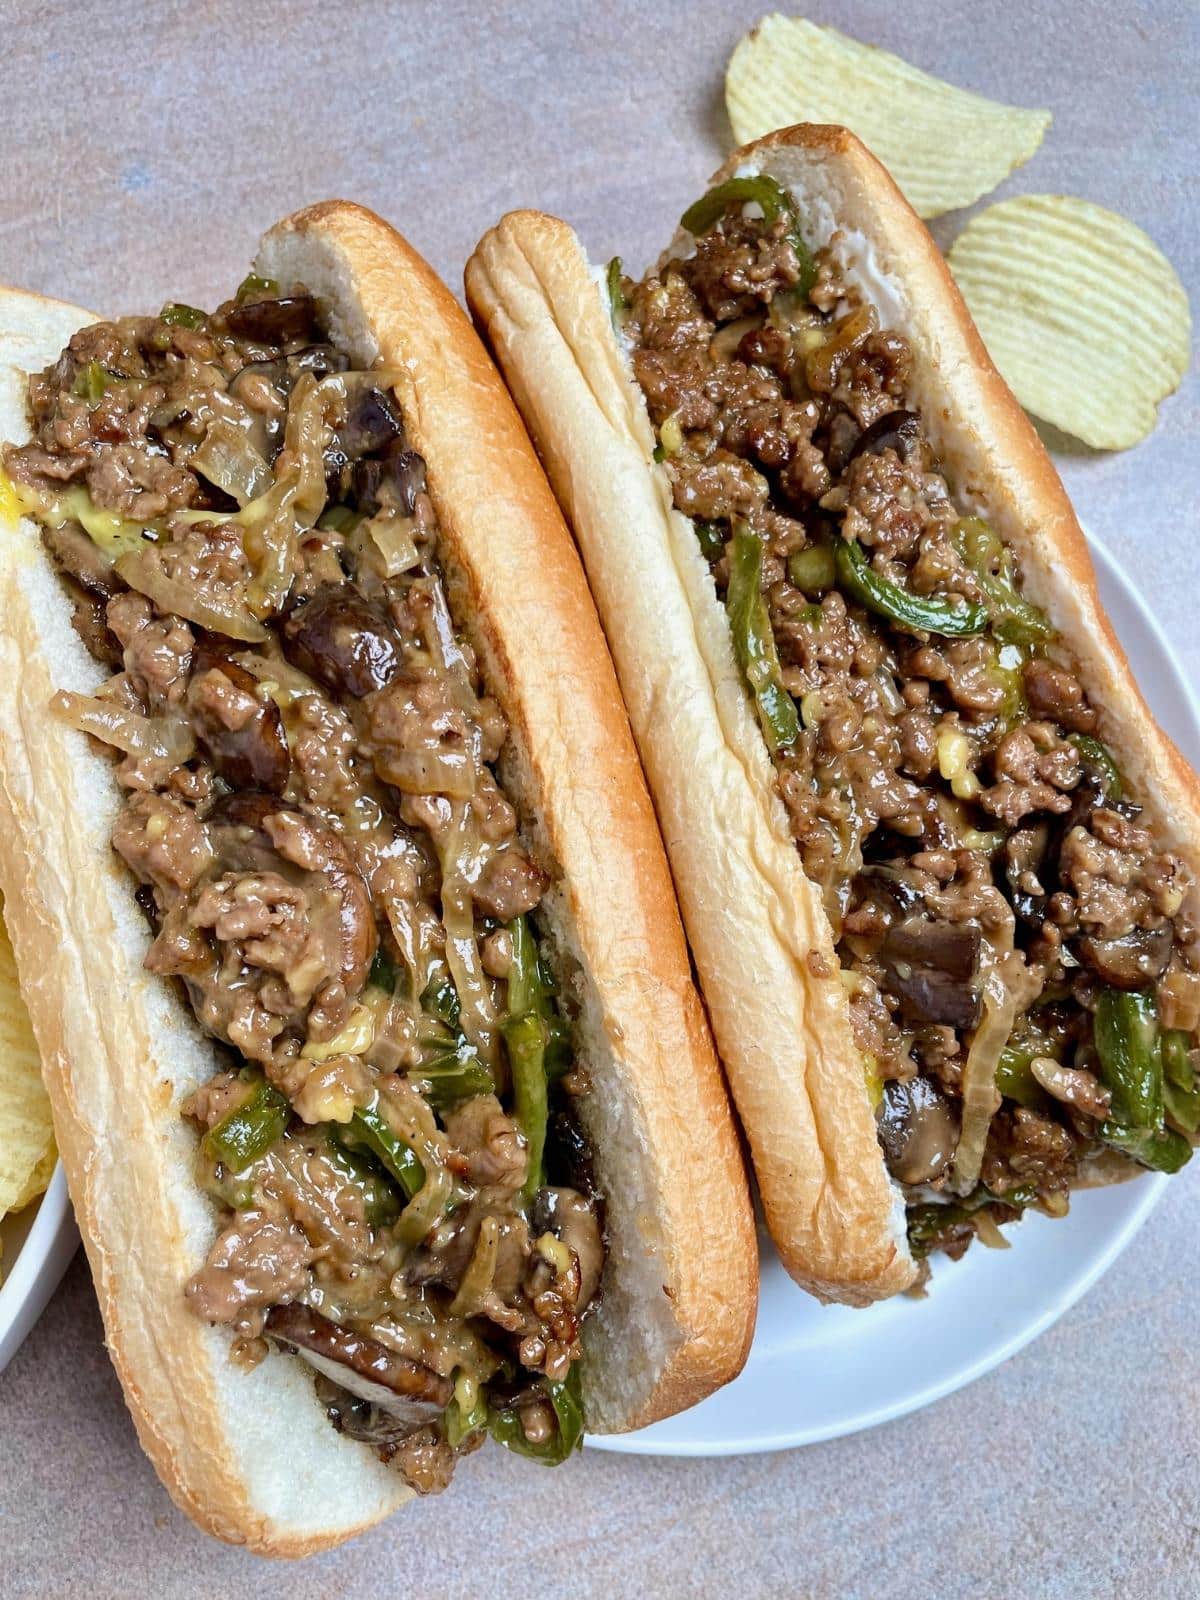 Two philly cheesesteaks.